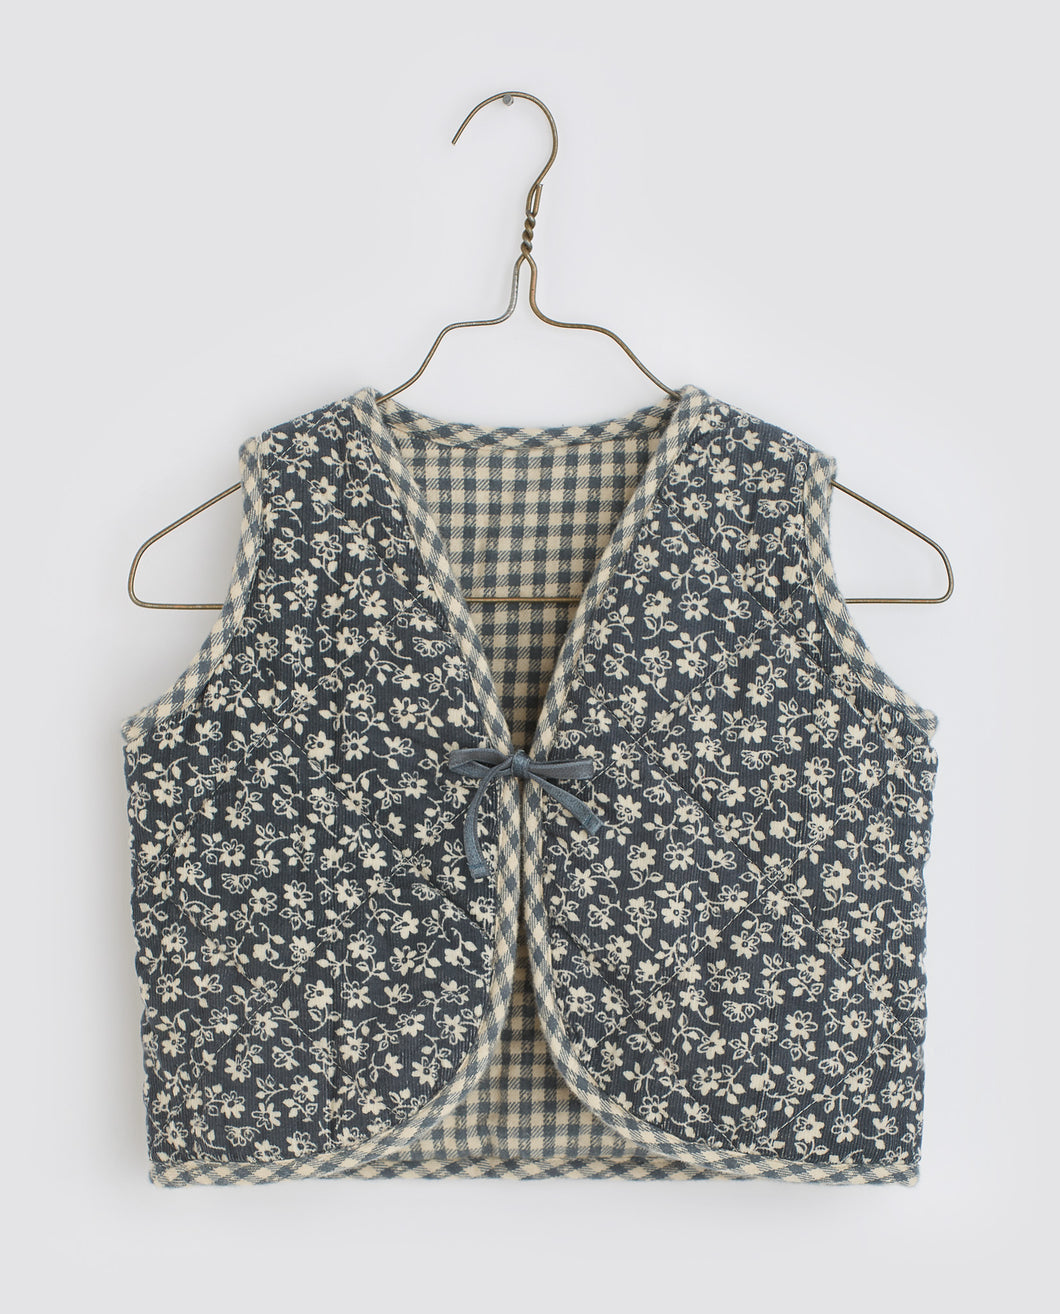 Little Cotton Clothes Bay Waistcoat - Forget-me-not Floral/Flannel Check in Cove Blue - 2/3Y, 4/5Y, 5/6Y